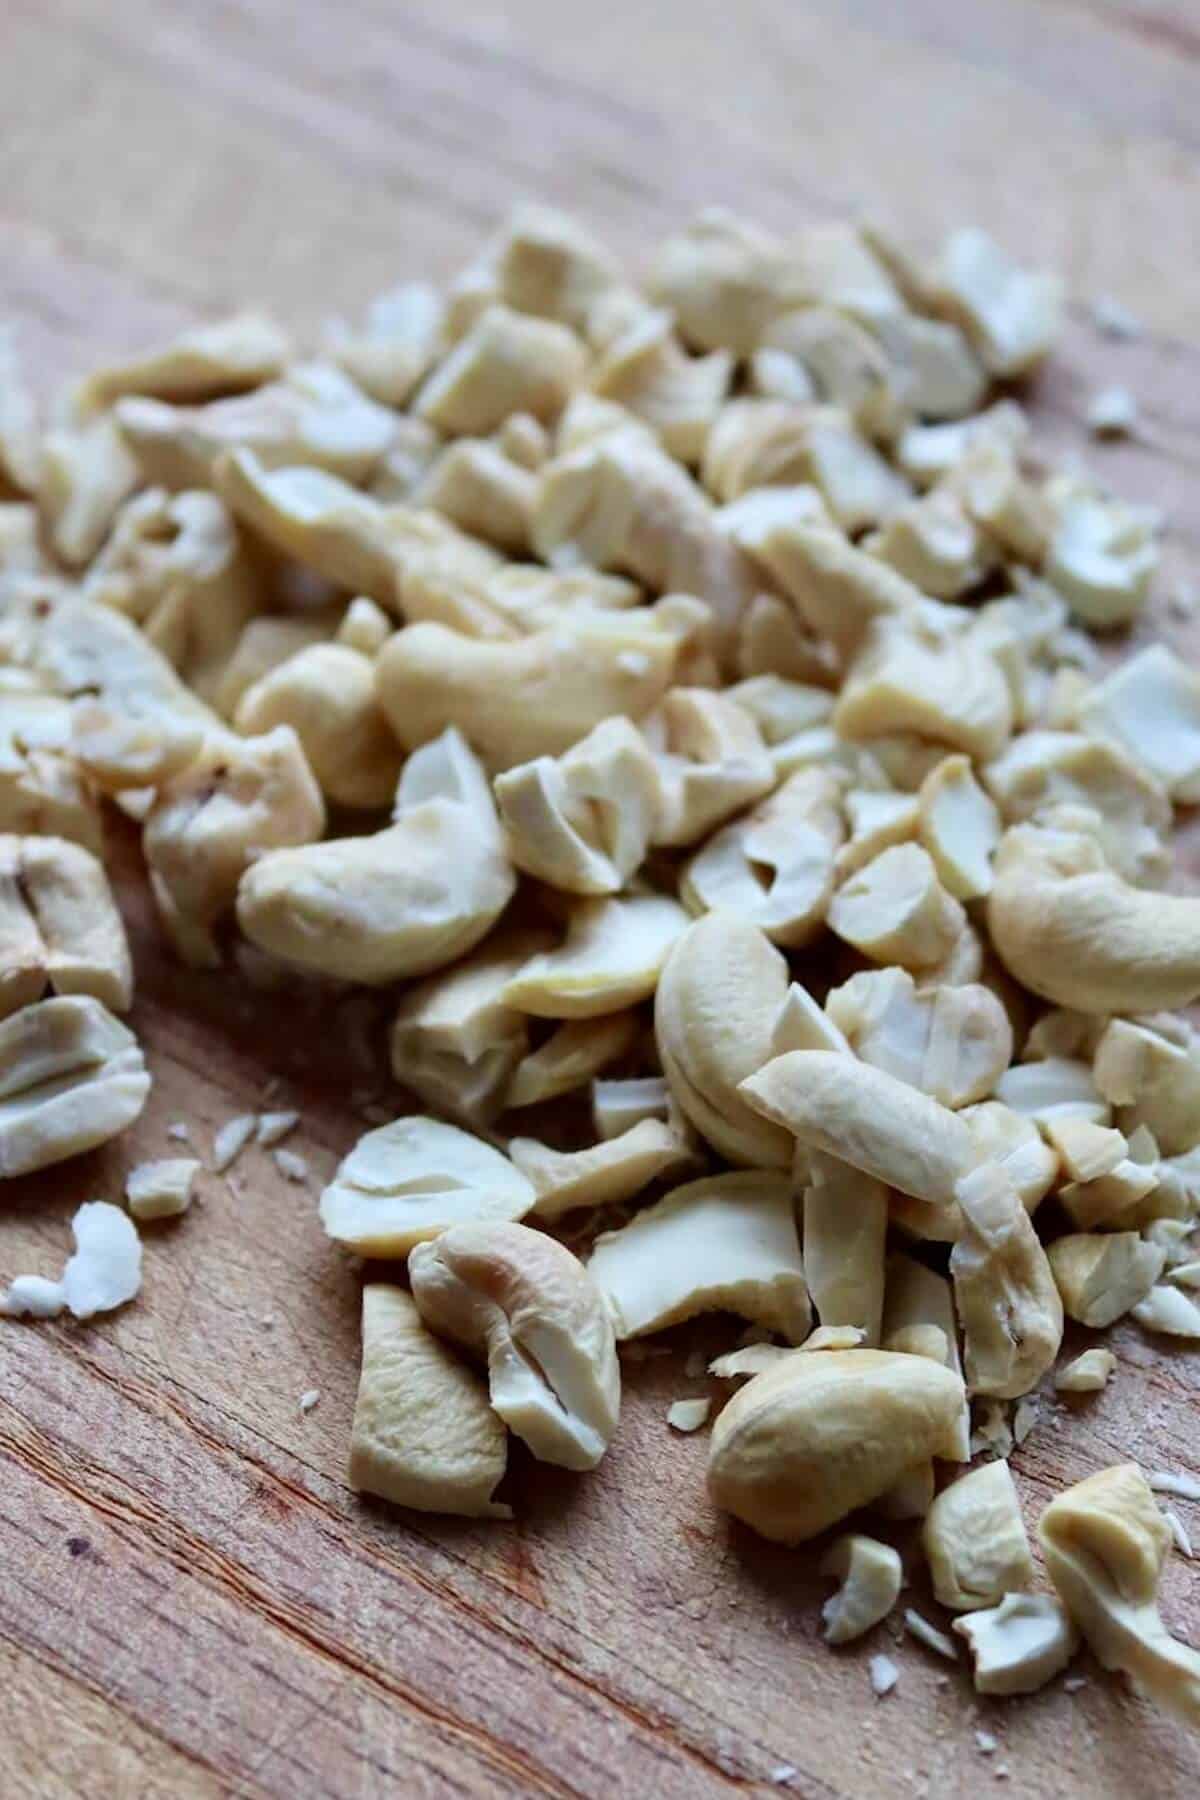 Chopped cashew nuts on a wooden chopping board 